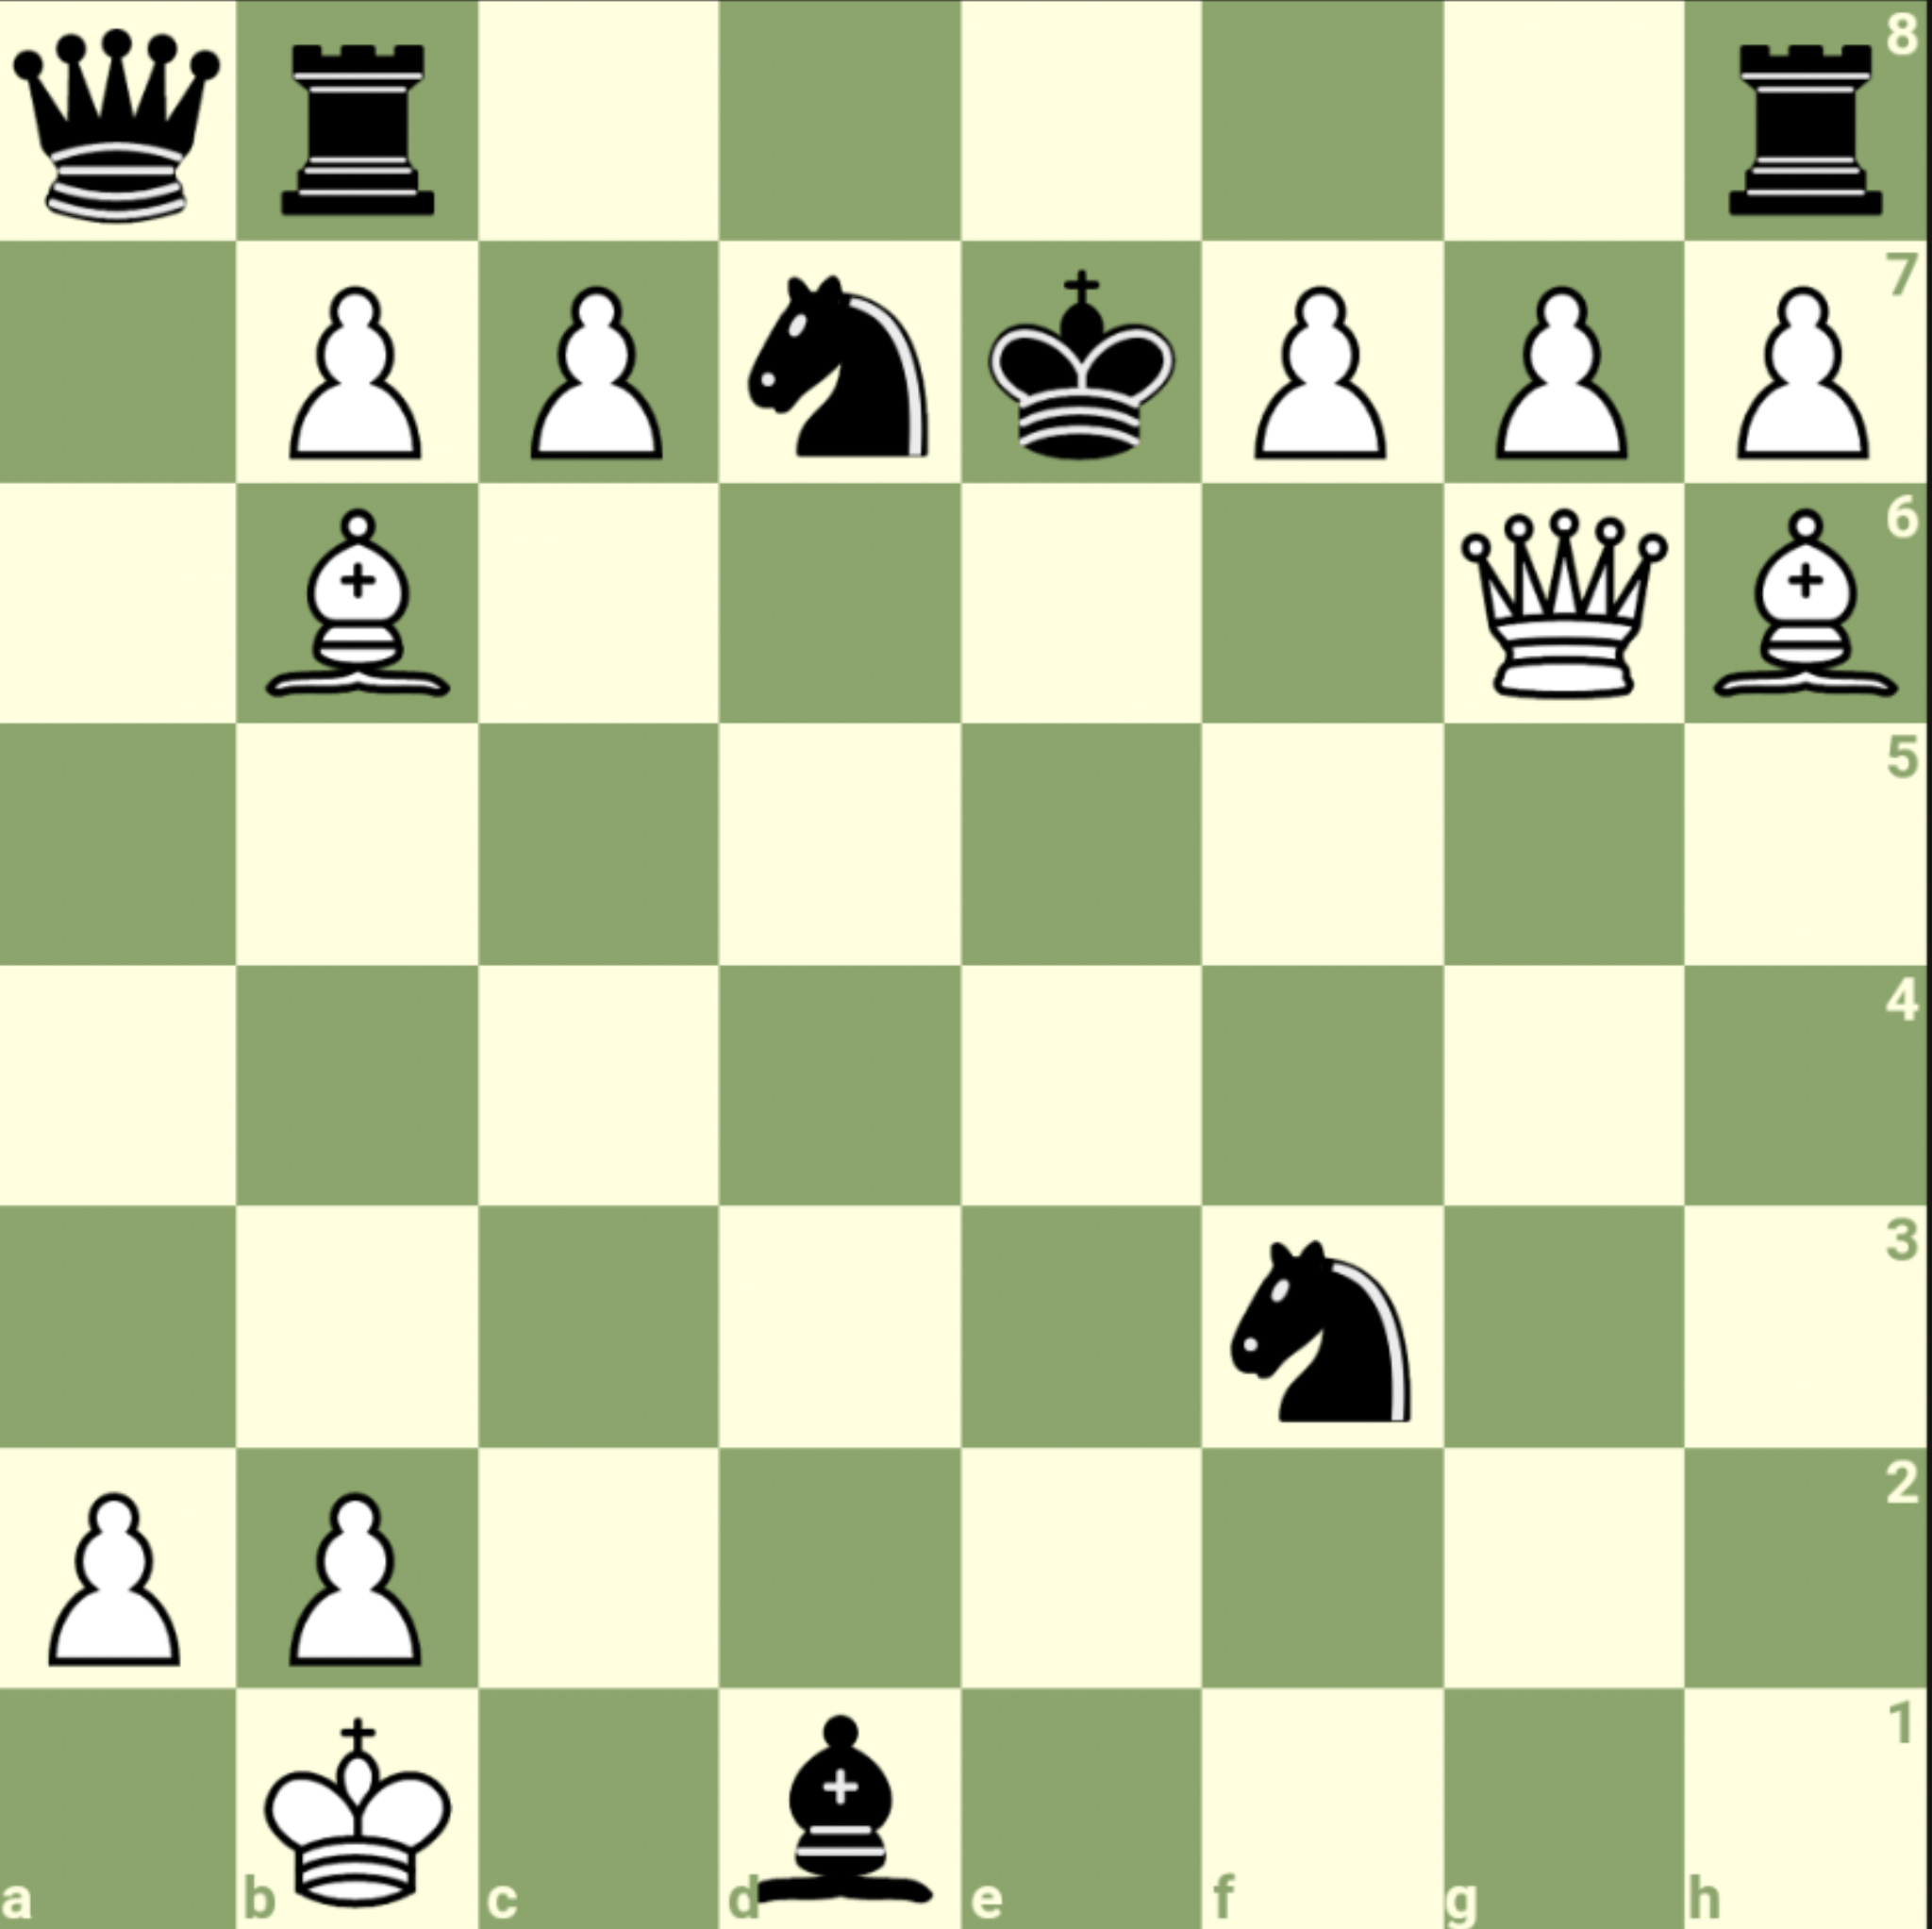 Puzzles For Fun - Chess Forums 